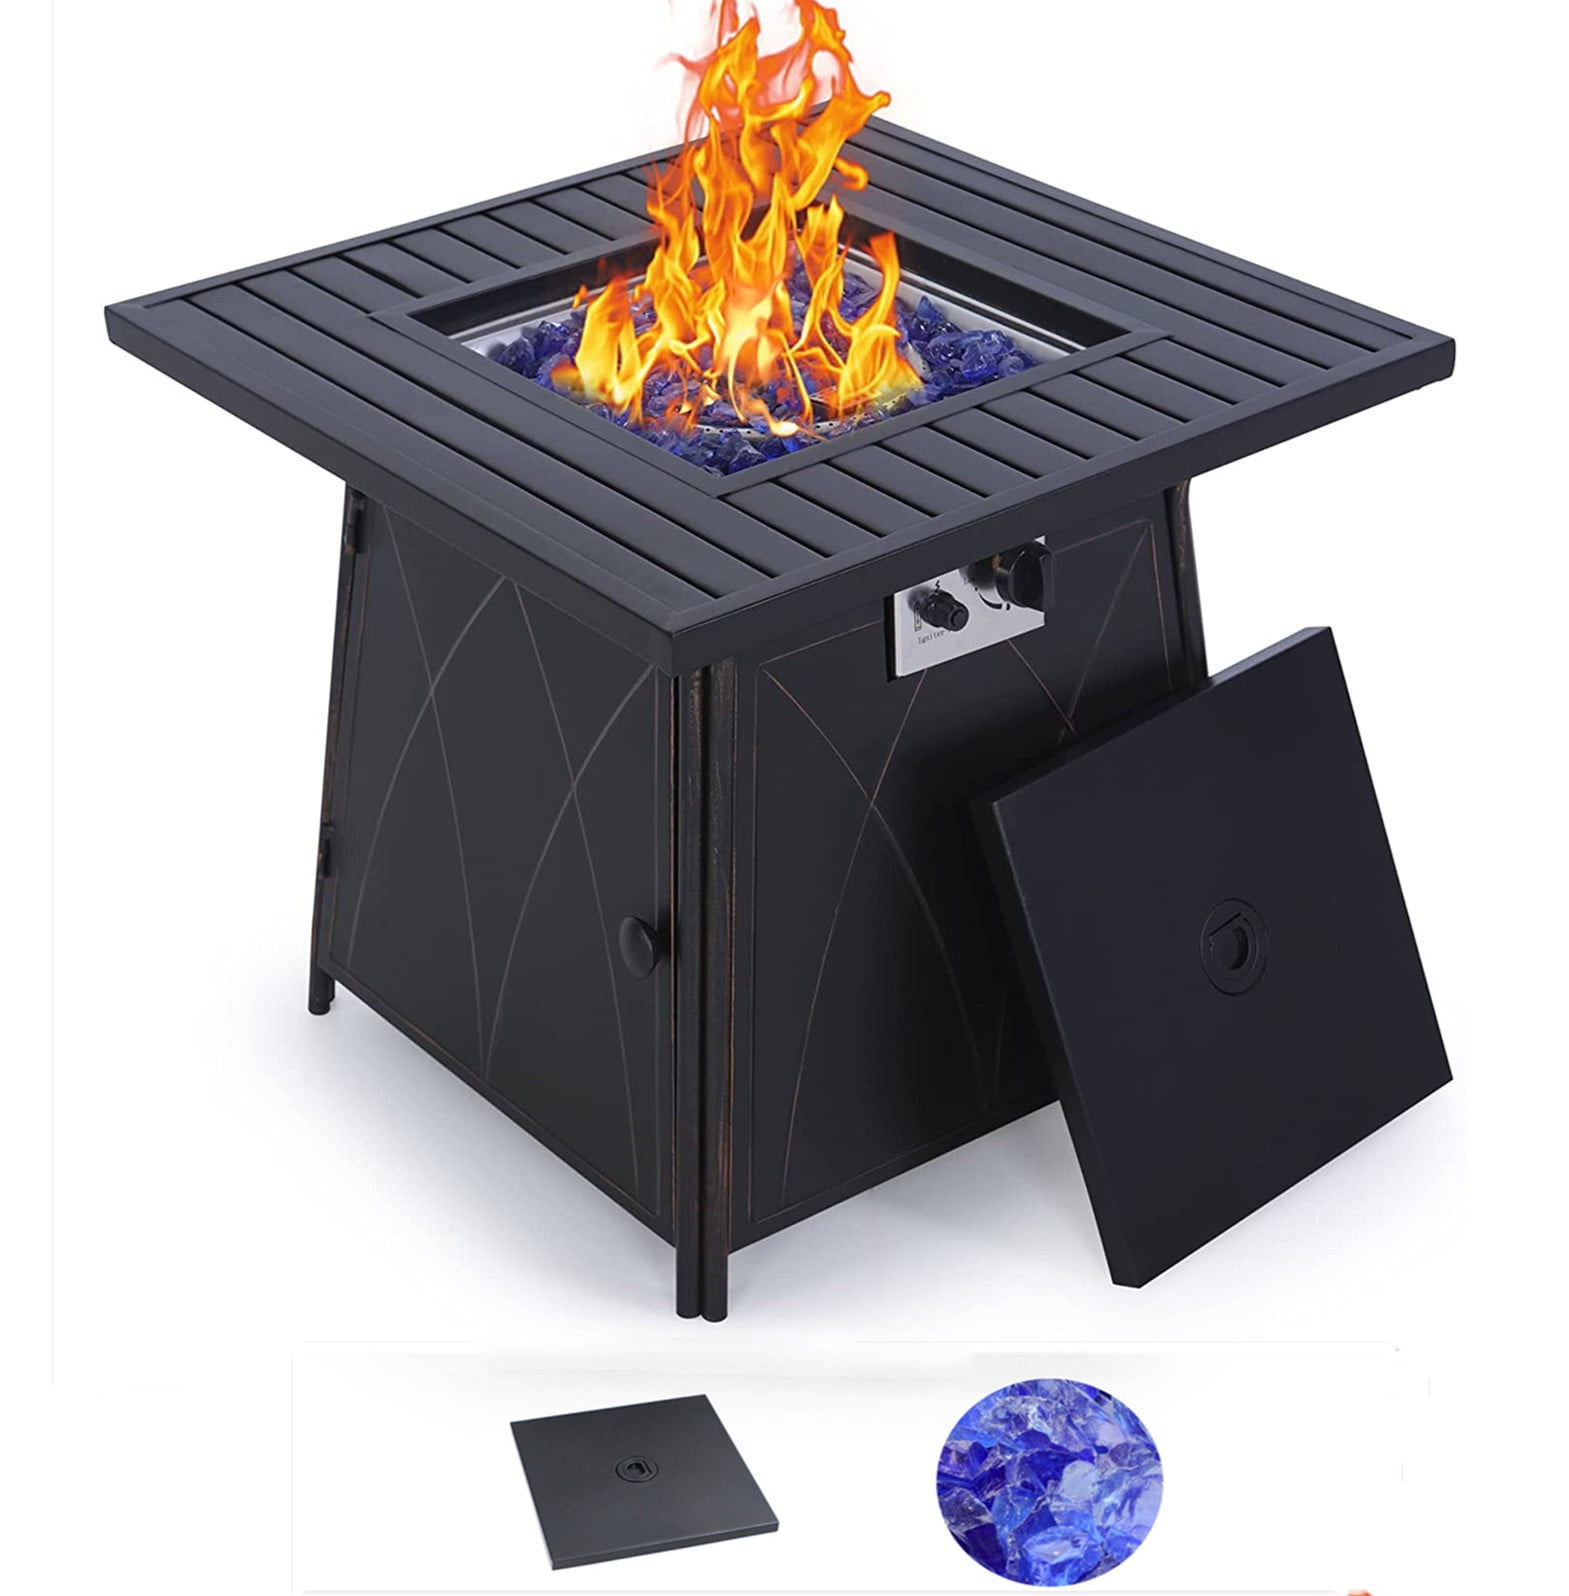 Mf Studio Gas Fire Pit Table 28 Inch, Propane Powered Fire Pit